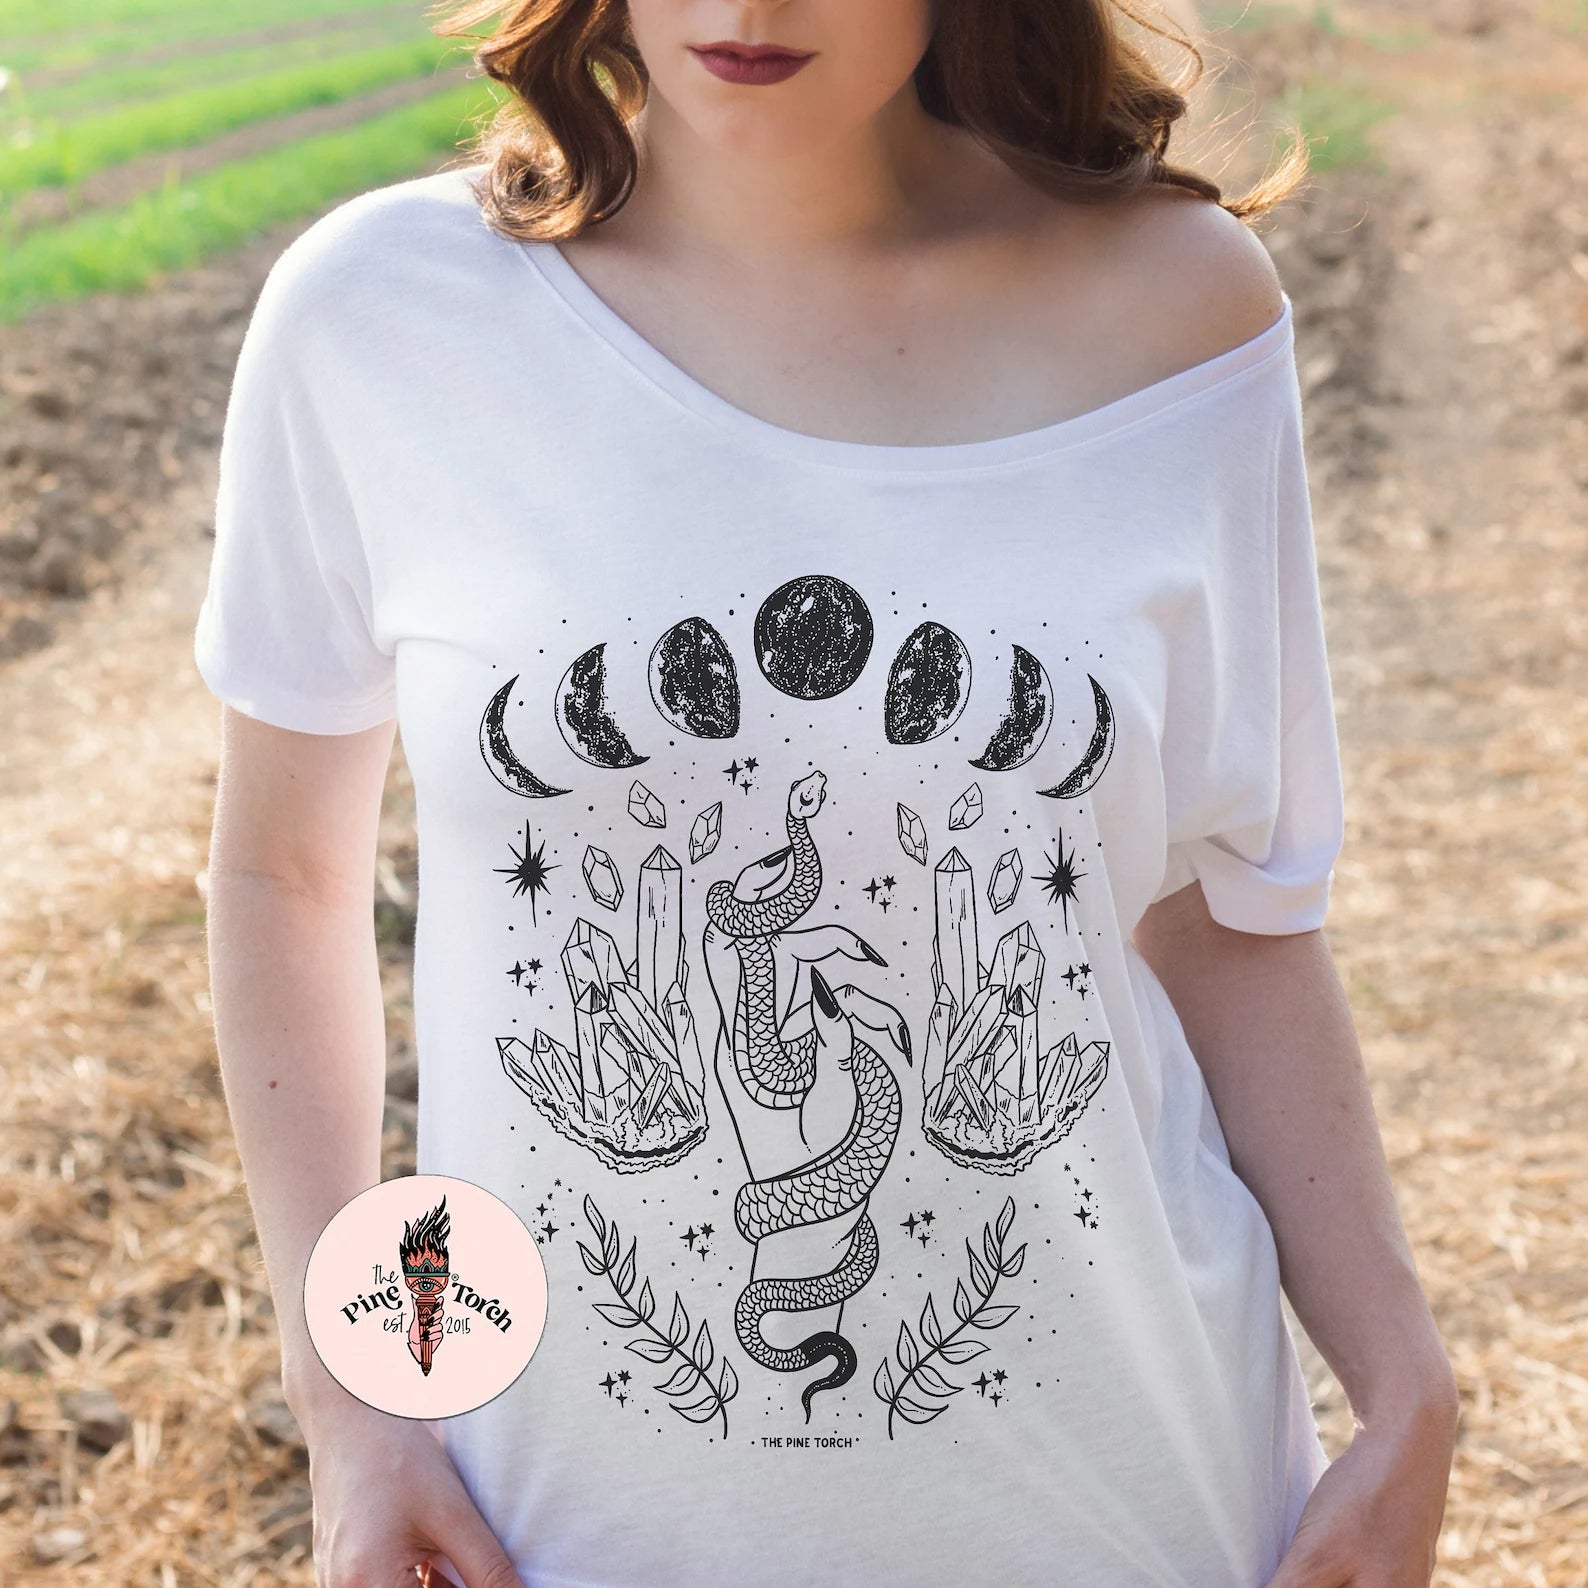 « REACH FOR THE MOON » WOMEN'S SLOUCHY TEE